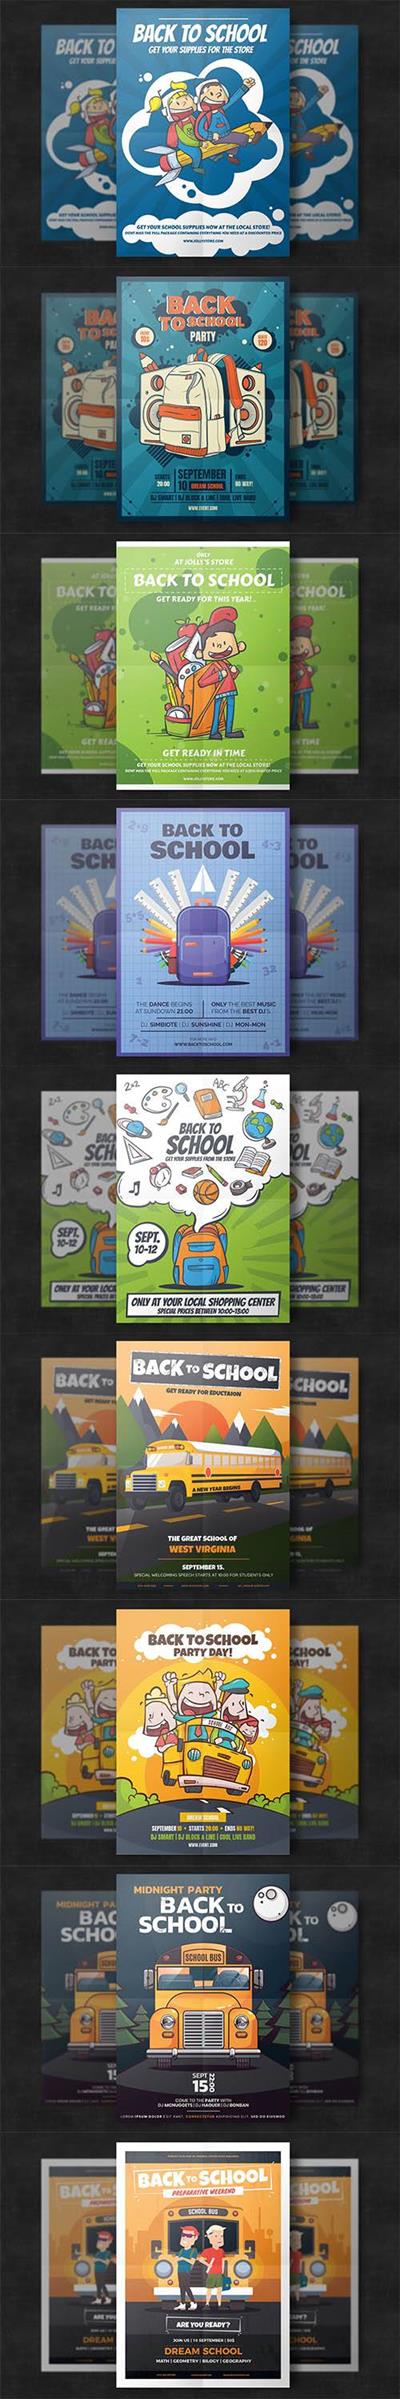 10 Back To School Flyer Templates PSD